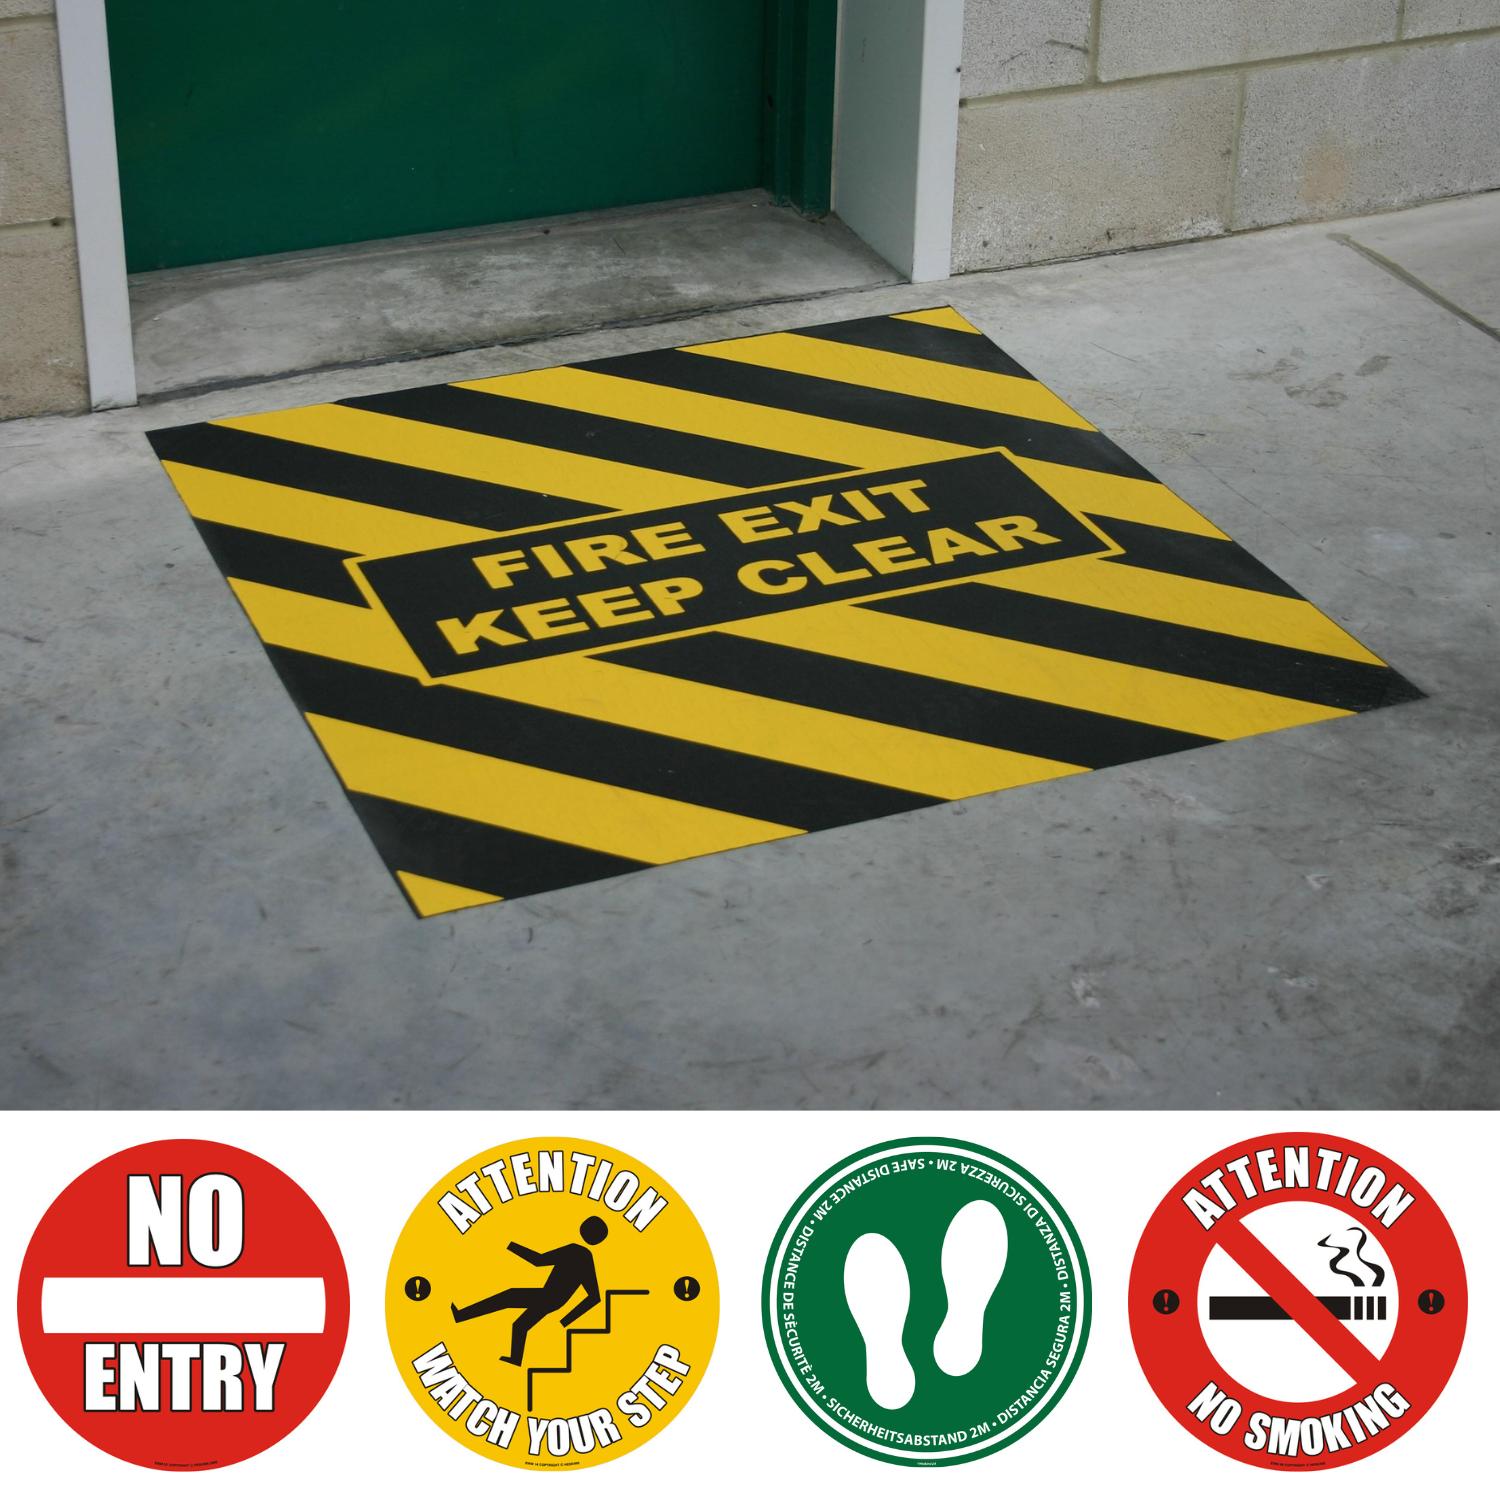 warehouse_marker_signs_74a2f633-9fba-4018-a837-bee84d1f79a0.png